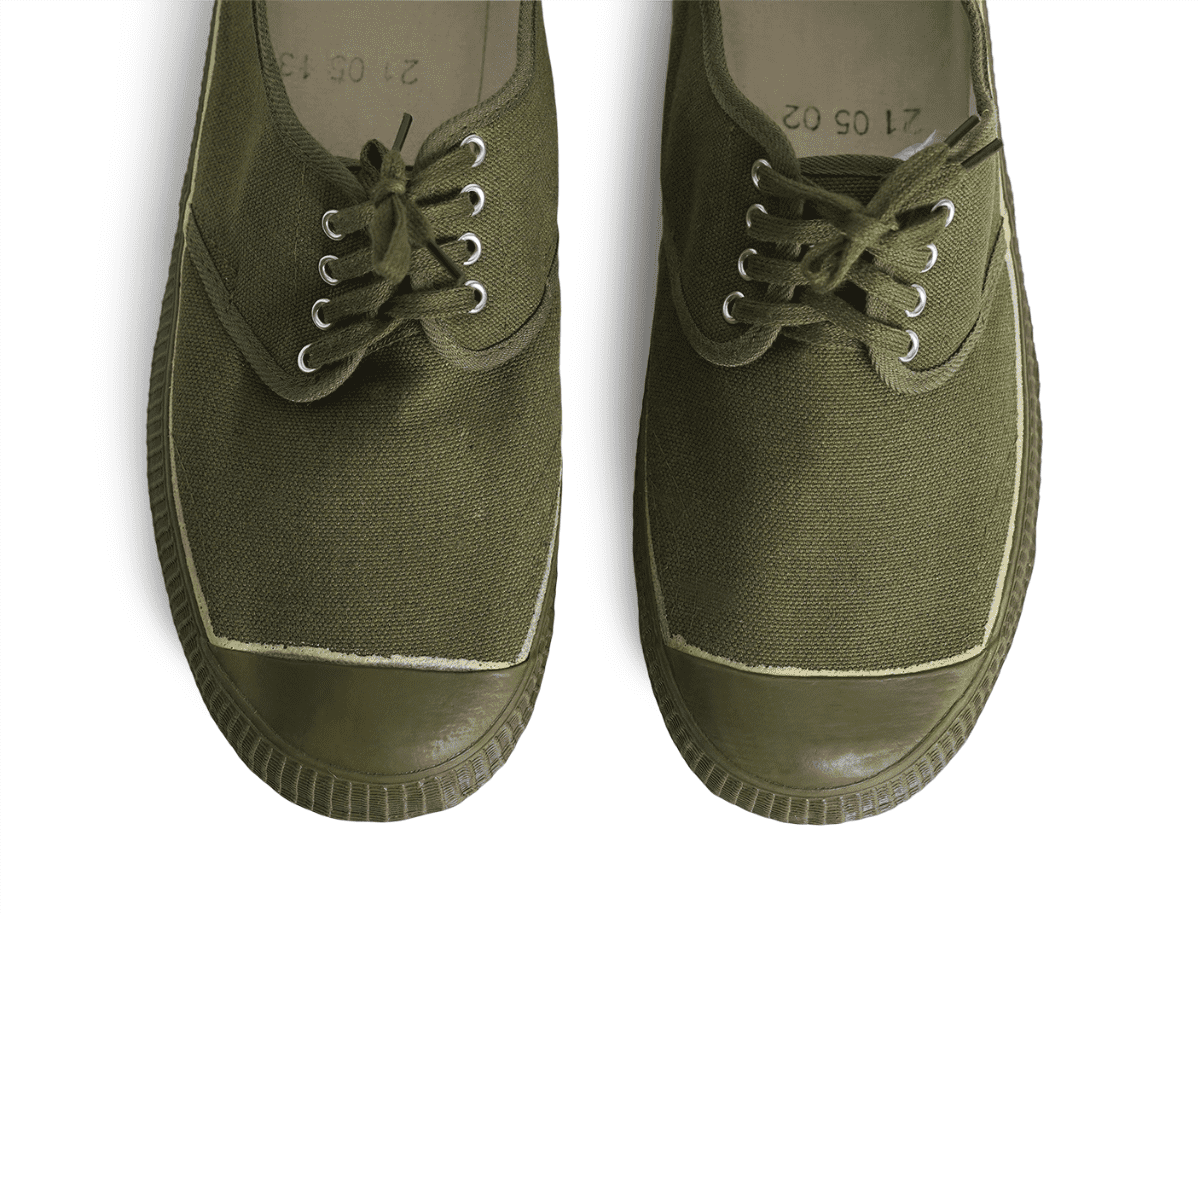 LIBRATION -  Chinese rubber-soled canvas shoes.